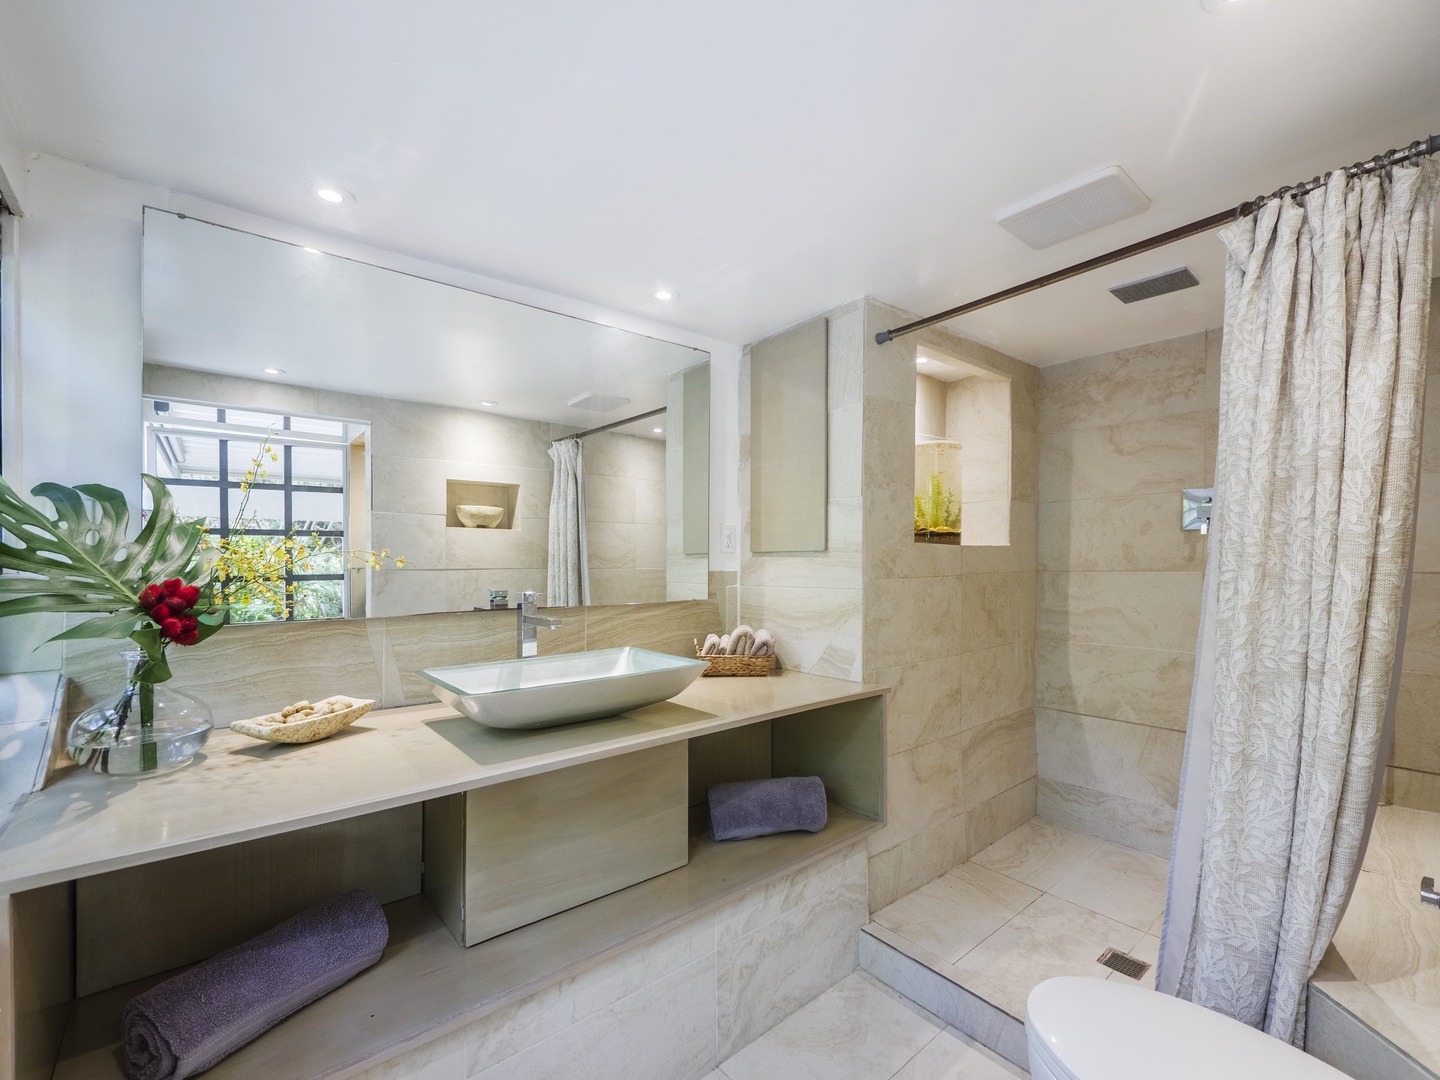 Honolulu Vacation Rentals, Diamond Head Bali Retreat** - Ensuite bathroom with a wide vanity space and a walk-in shower.